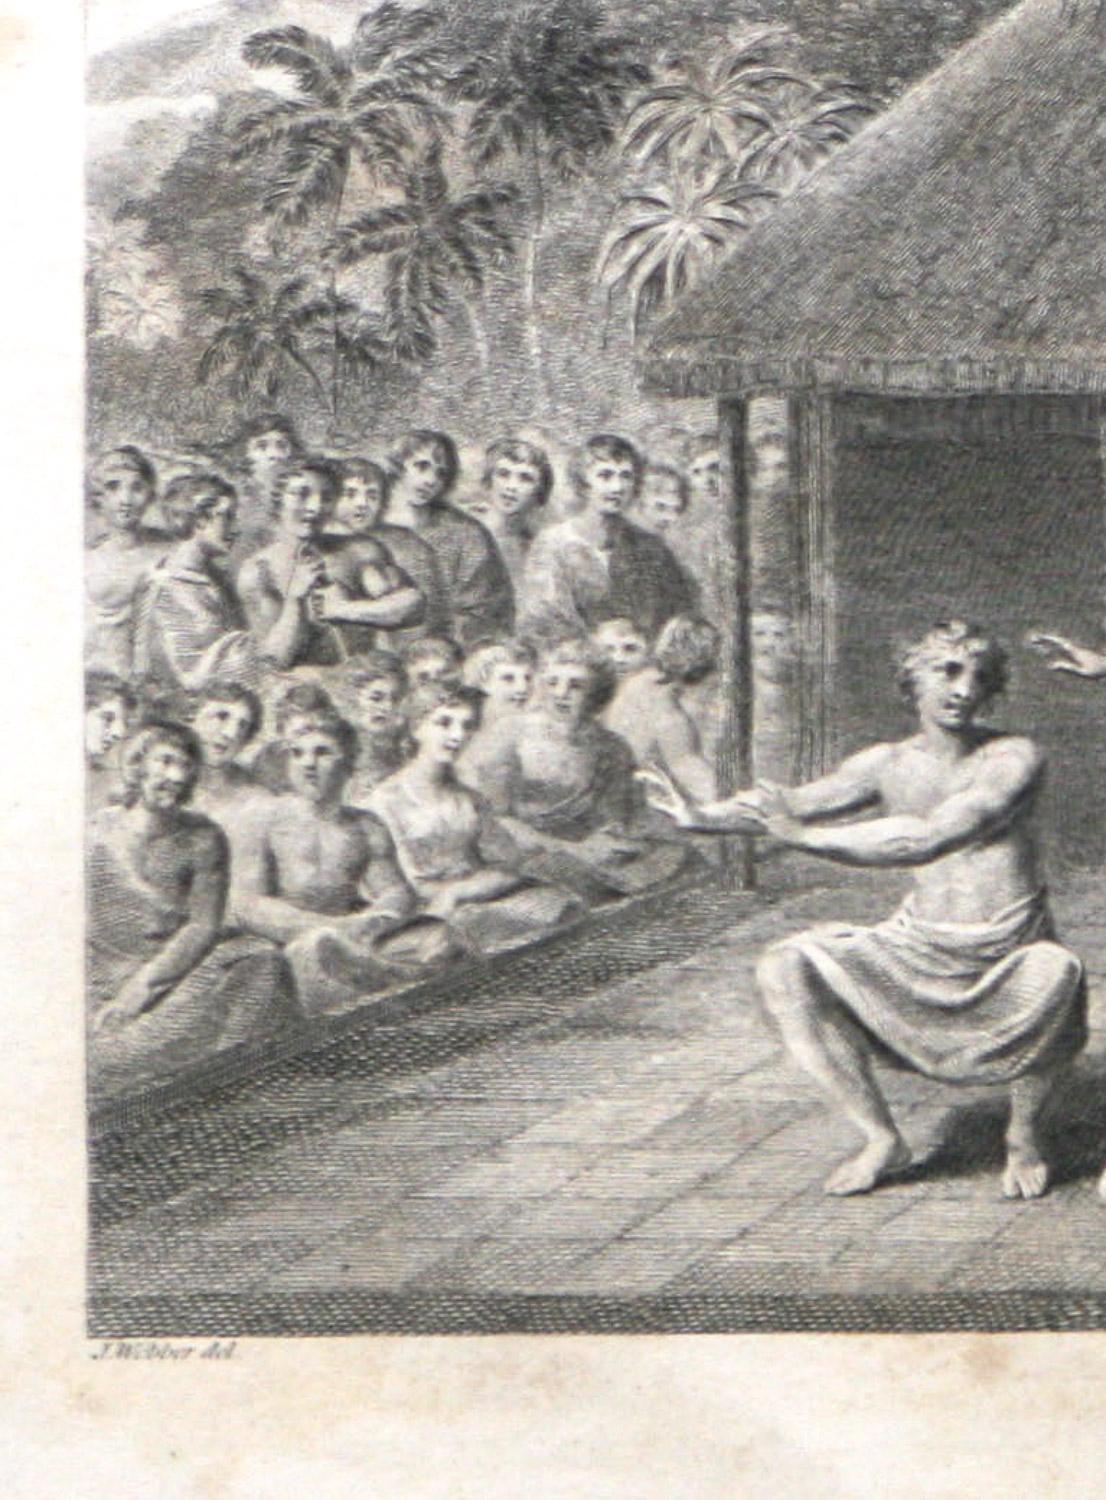 A Dance in Otaheite (Tahiti) 1784 James Cook Final Voyage by John Webber For Sale 3